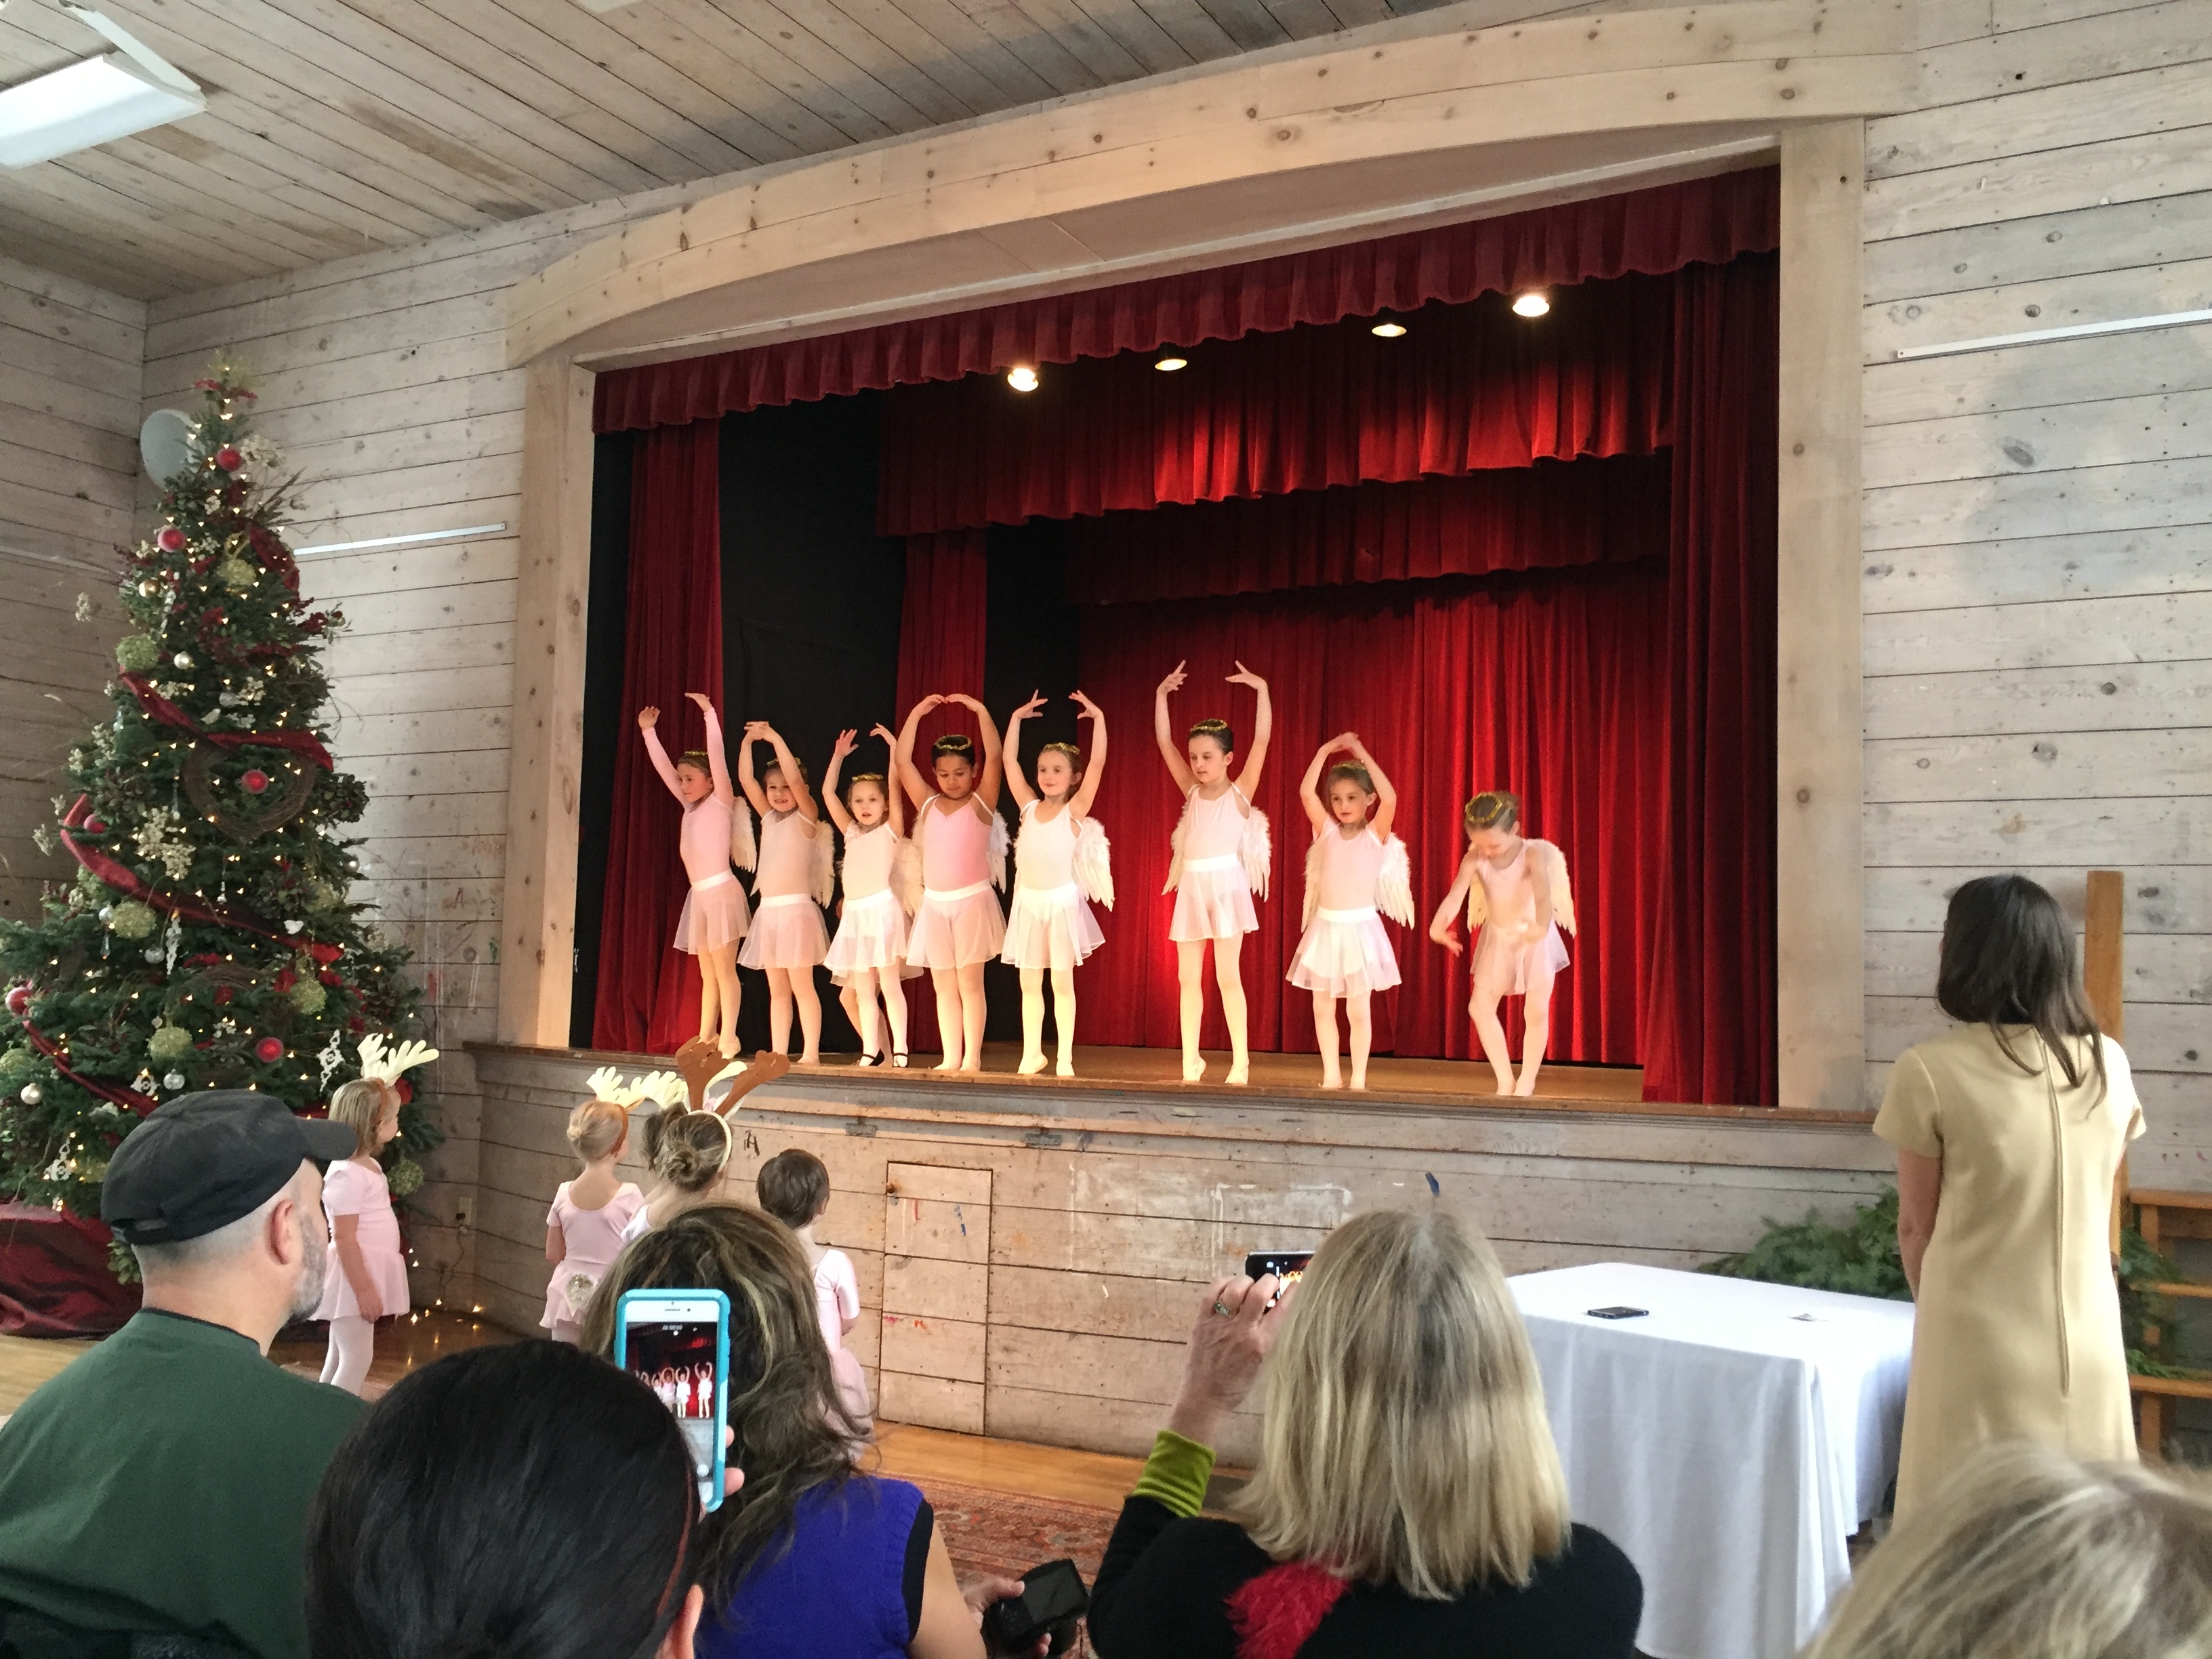 toddler ballarinas on stage at Christmas weaing light pink costumes and holding their arms in the air.